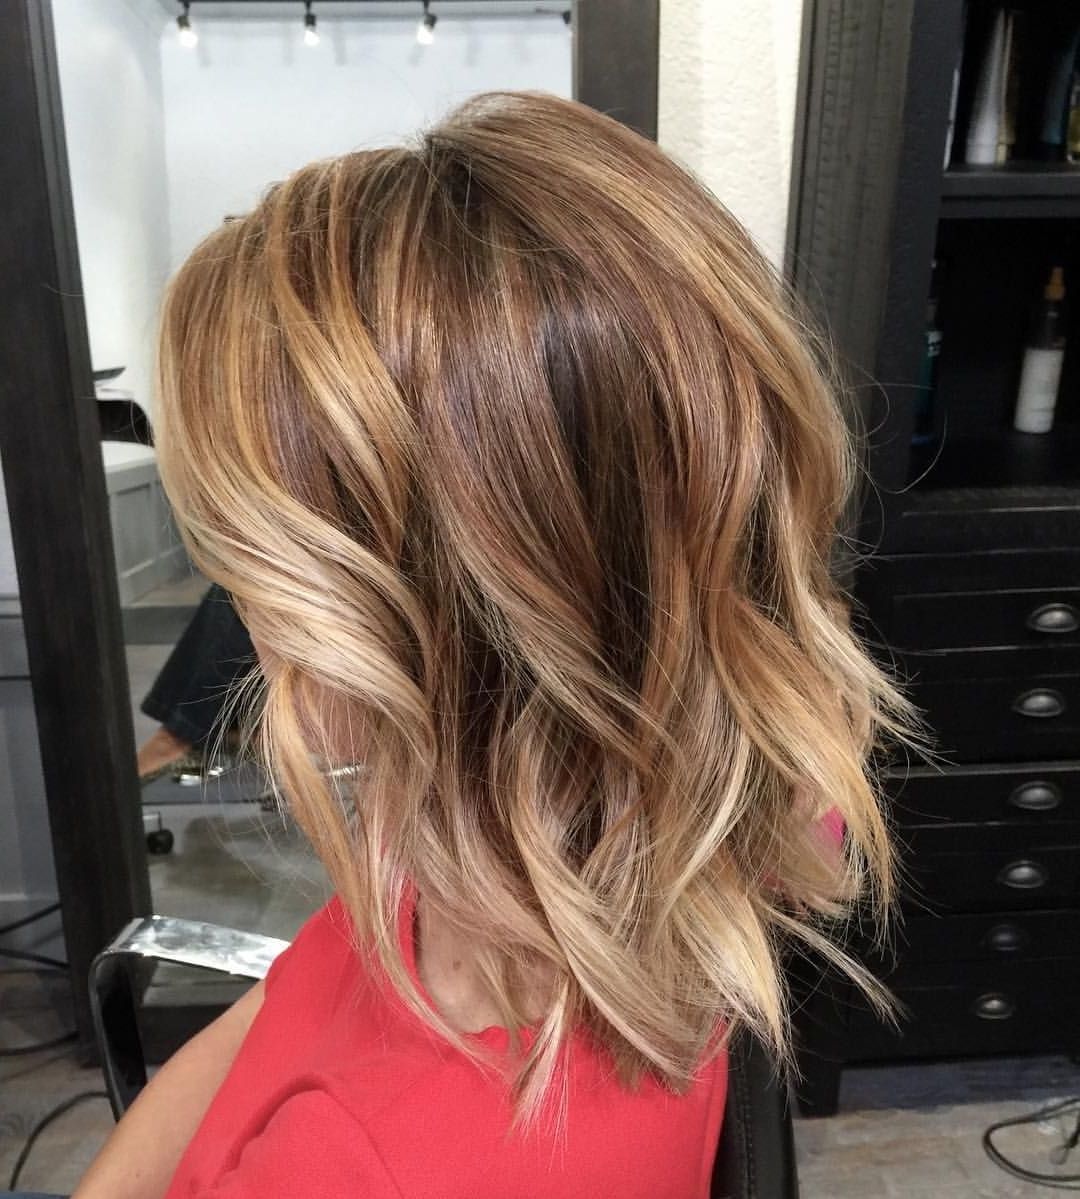 Cute Hairstyle – Bronde Bob With Beach Waves (View 14 of 20)